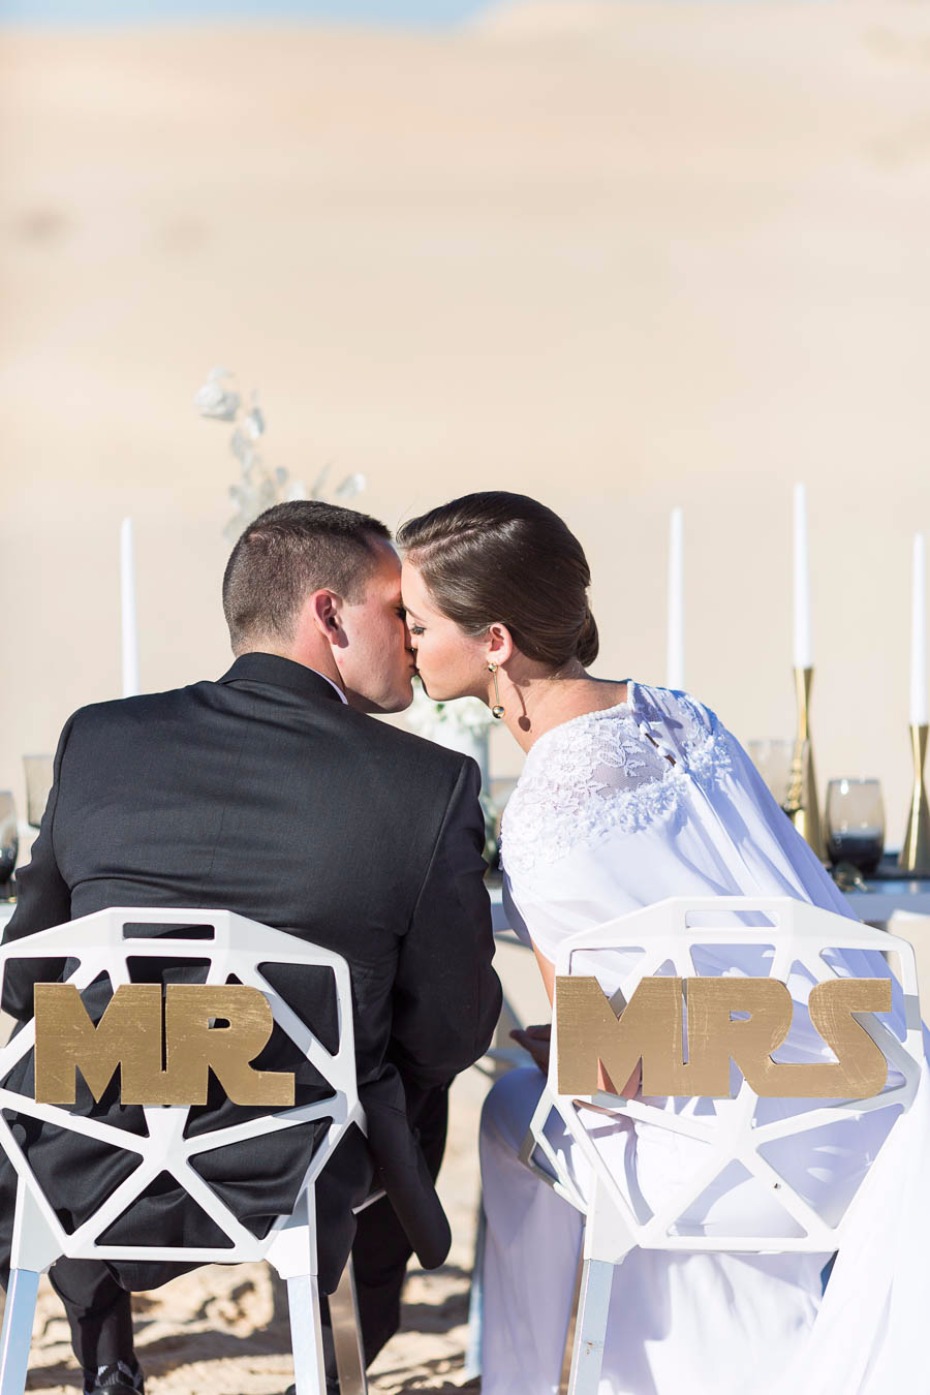 Star Wars themed Mr and Mrs wedding seat signs